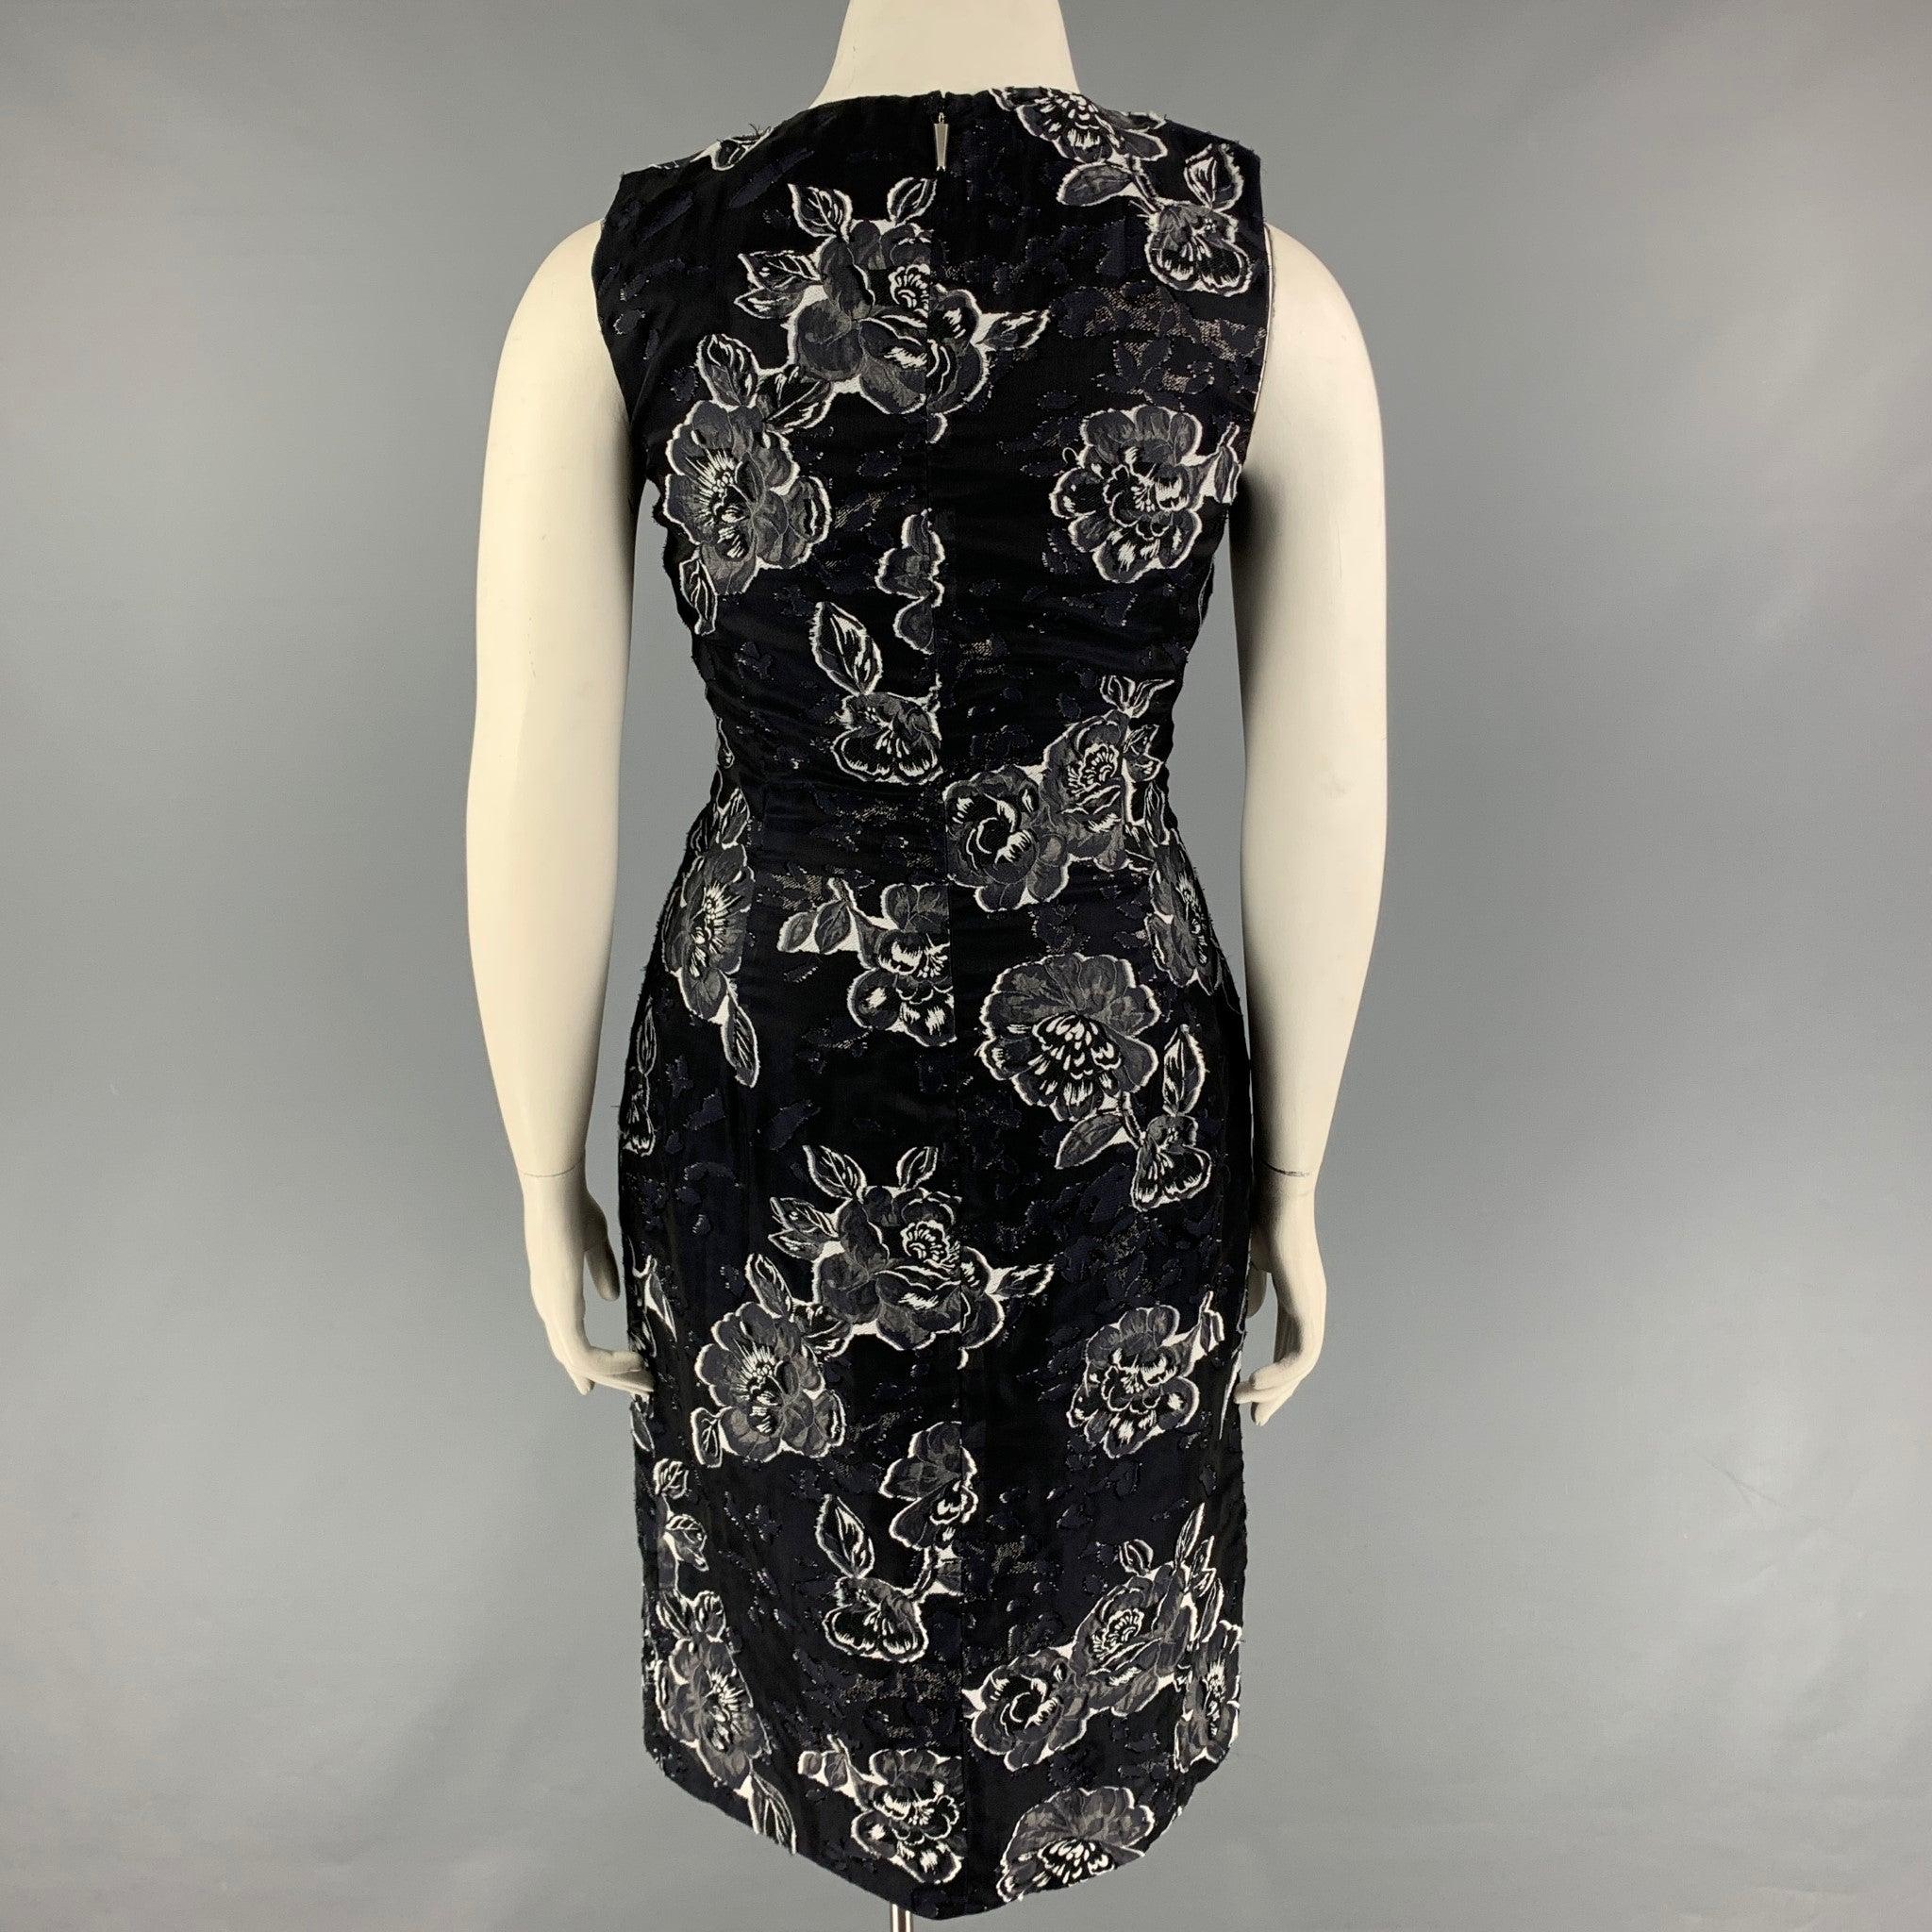 PRABAL GURUNG Size 10 Black Navy Silk Polyester Floral Sleeveless Dress In Good Condition For Sale In San Francisco, CA